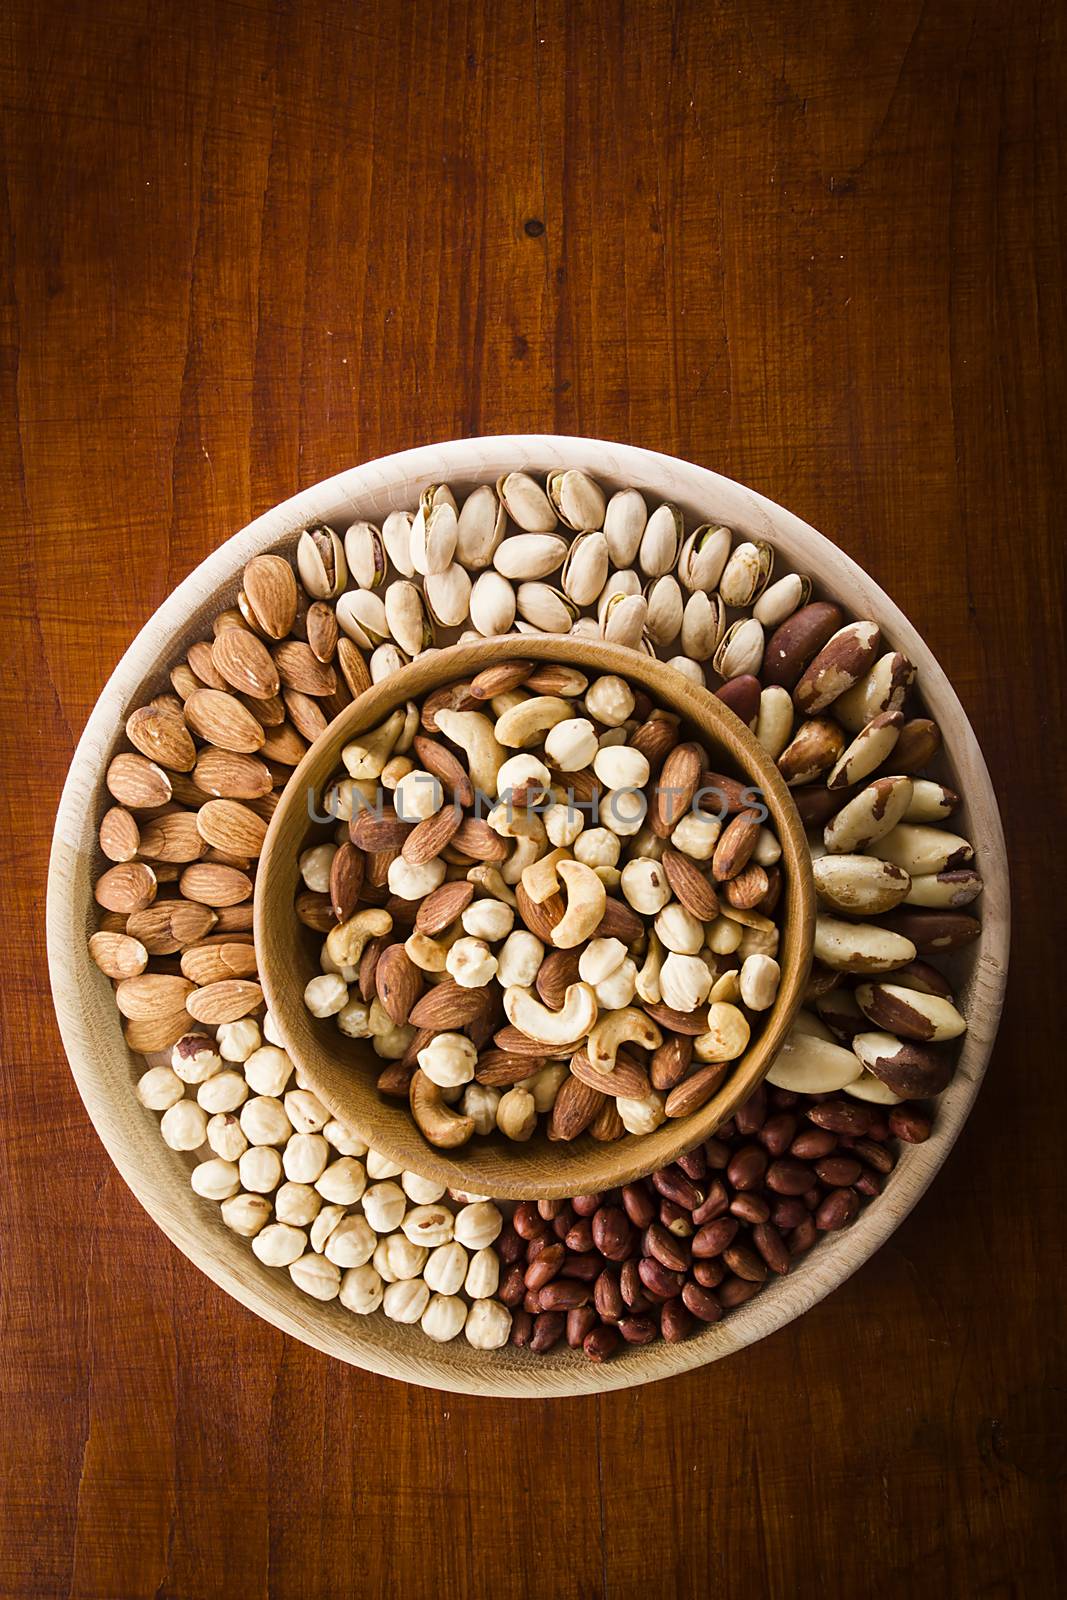 The diverse set of nuts by VIPDesignUSA